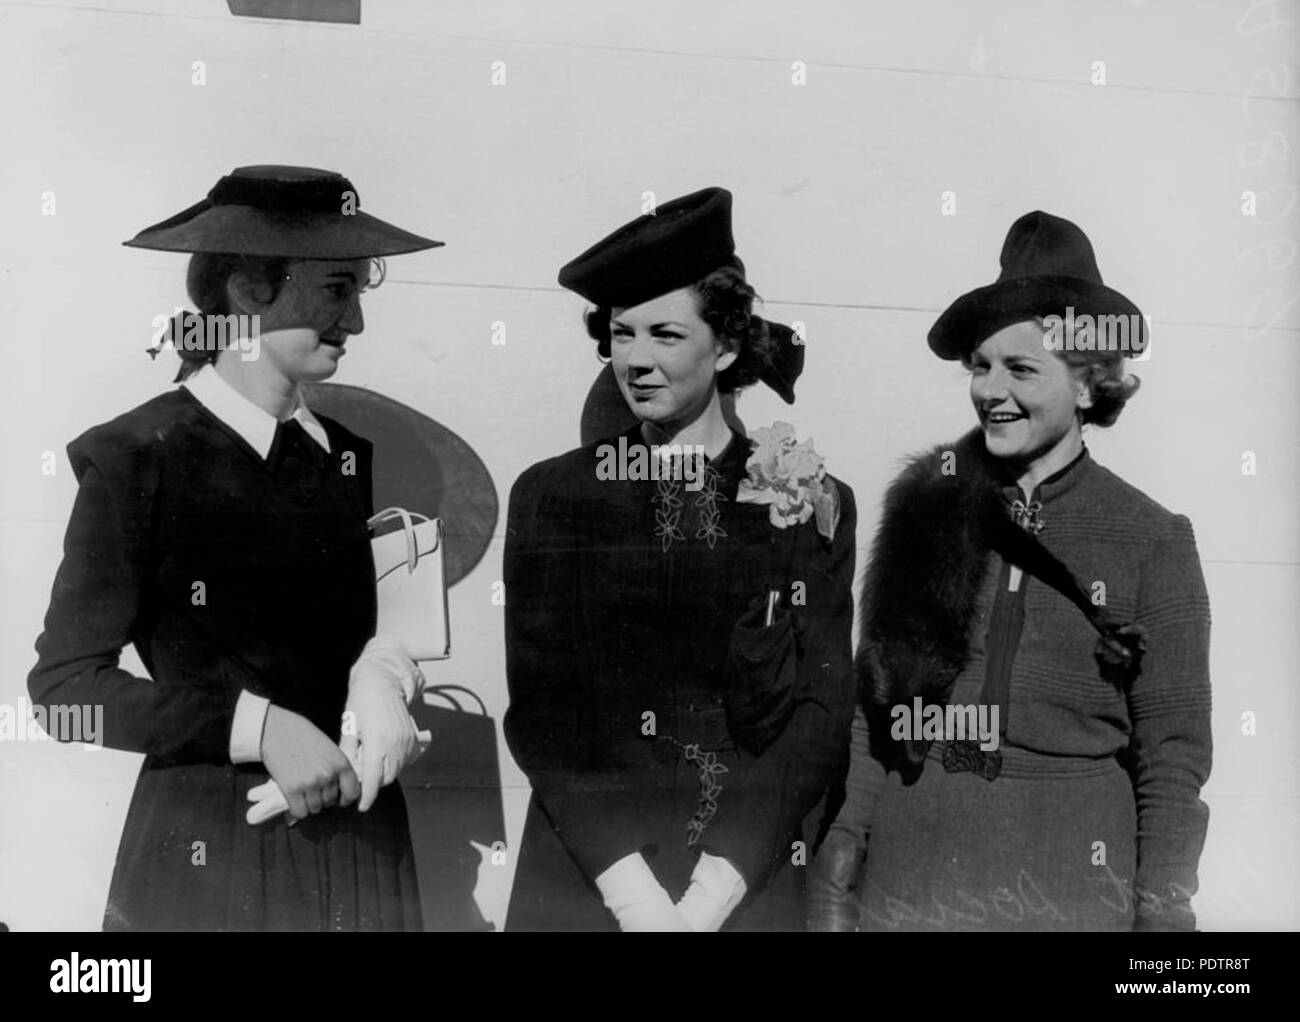 201 StateLibQld 1 104492 Joan Haynes, Peggy Allen and Mrs W. D. Hardham enjoying a day out at Ascot races, Brisbane, 1939 Stock Photo